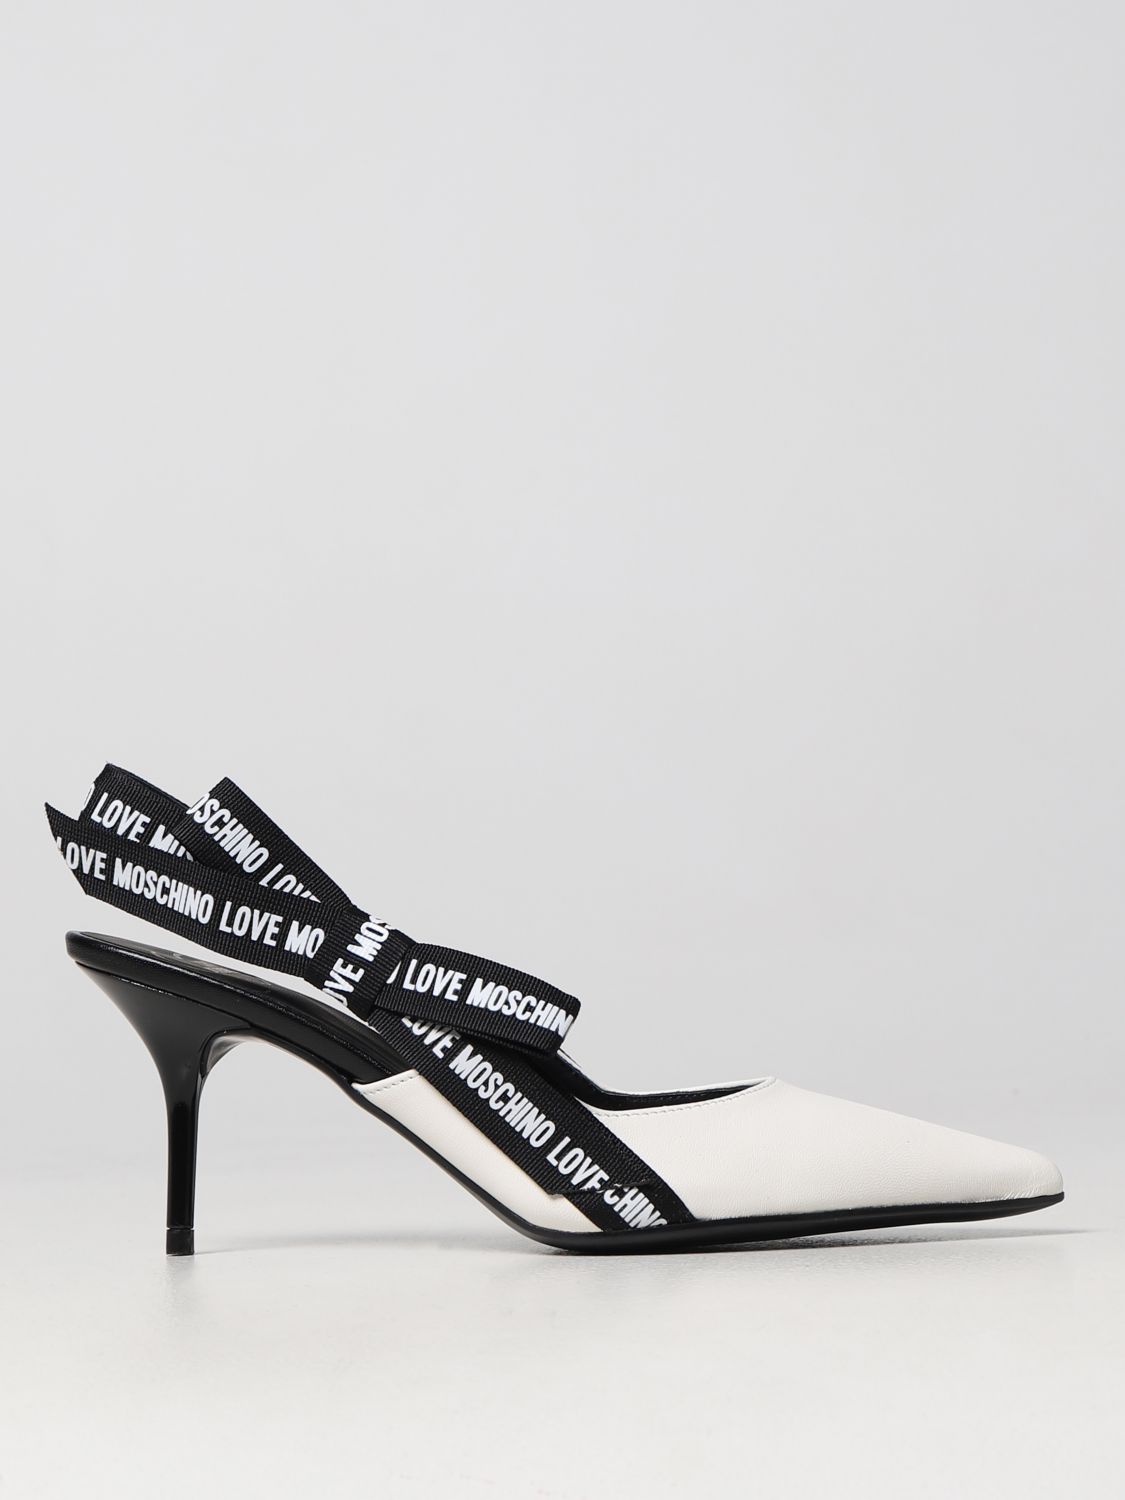 Total 48+ imagen moschino shoes womens - Abzlocal.mx